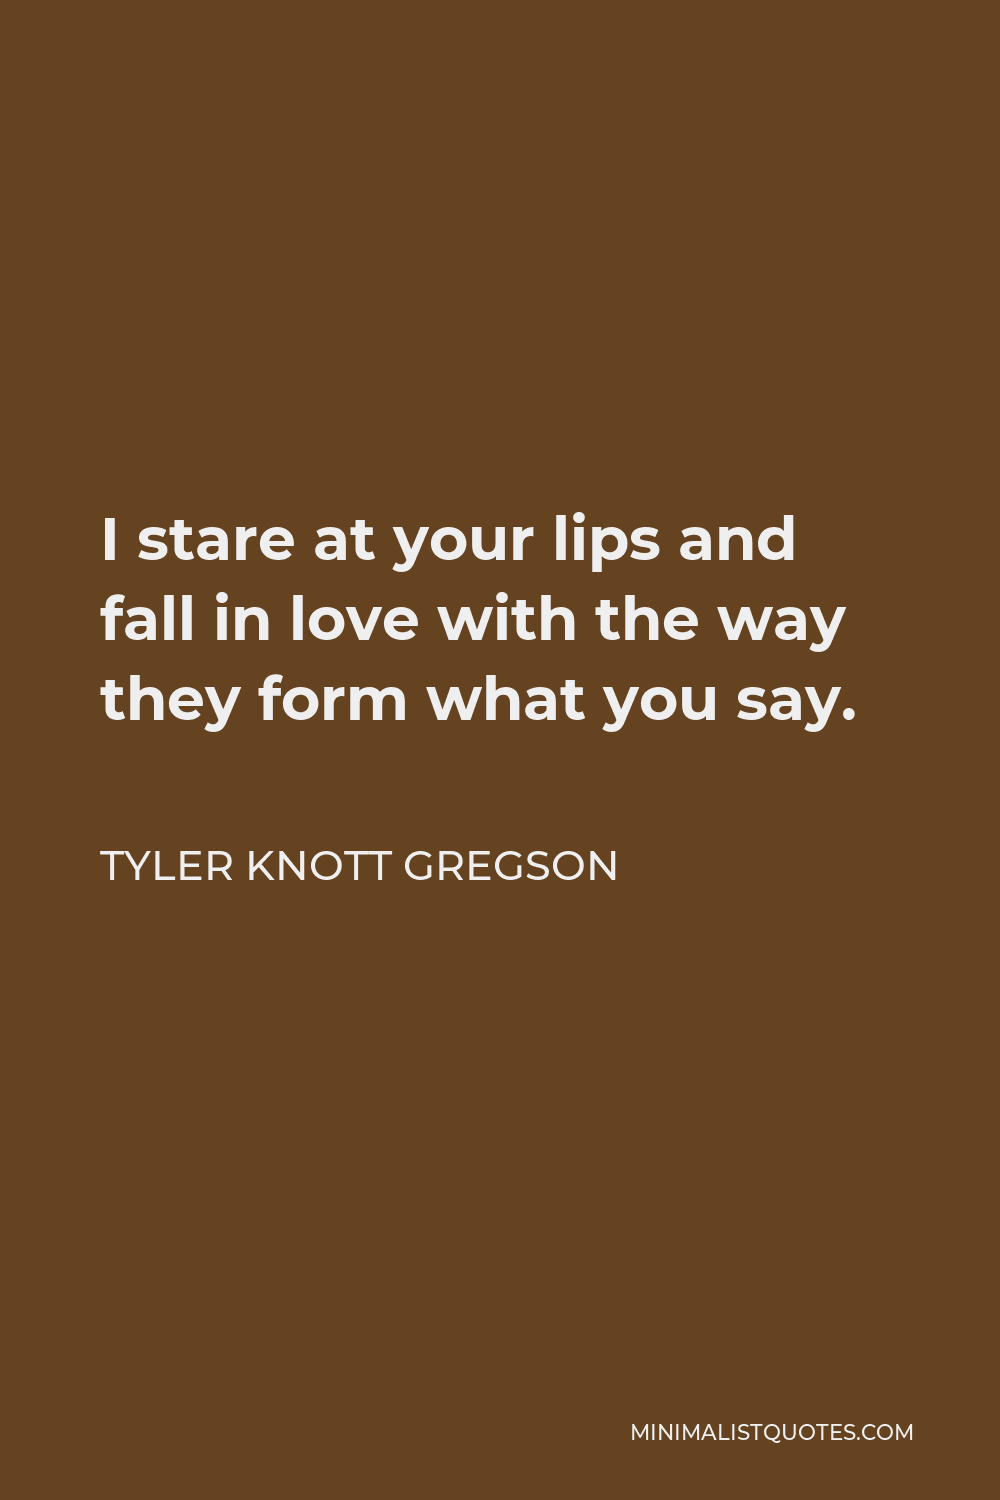 Tyler Knott Gregson Quote - I stare at your lips and fall in love with the way they form what you say.